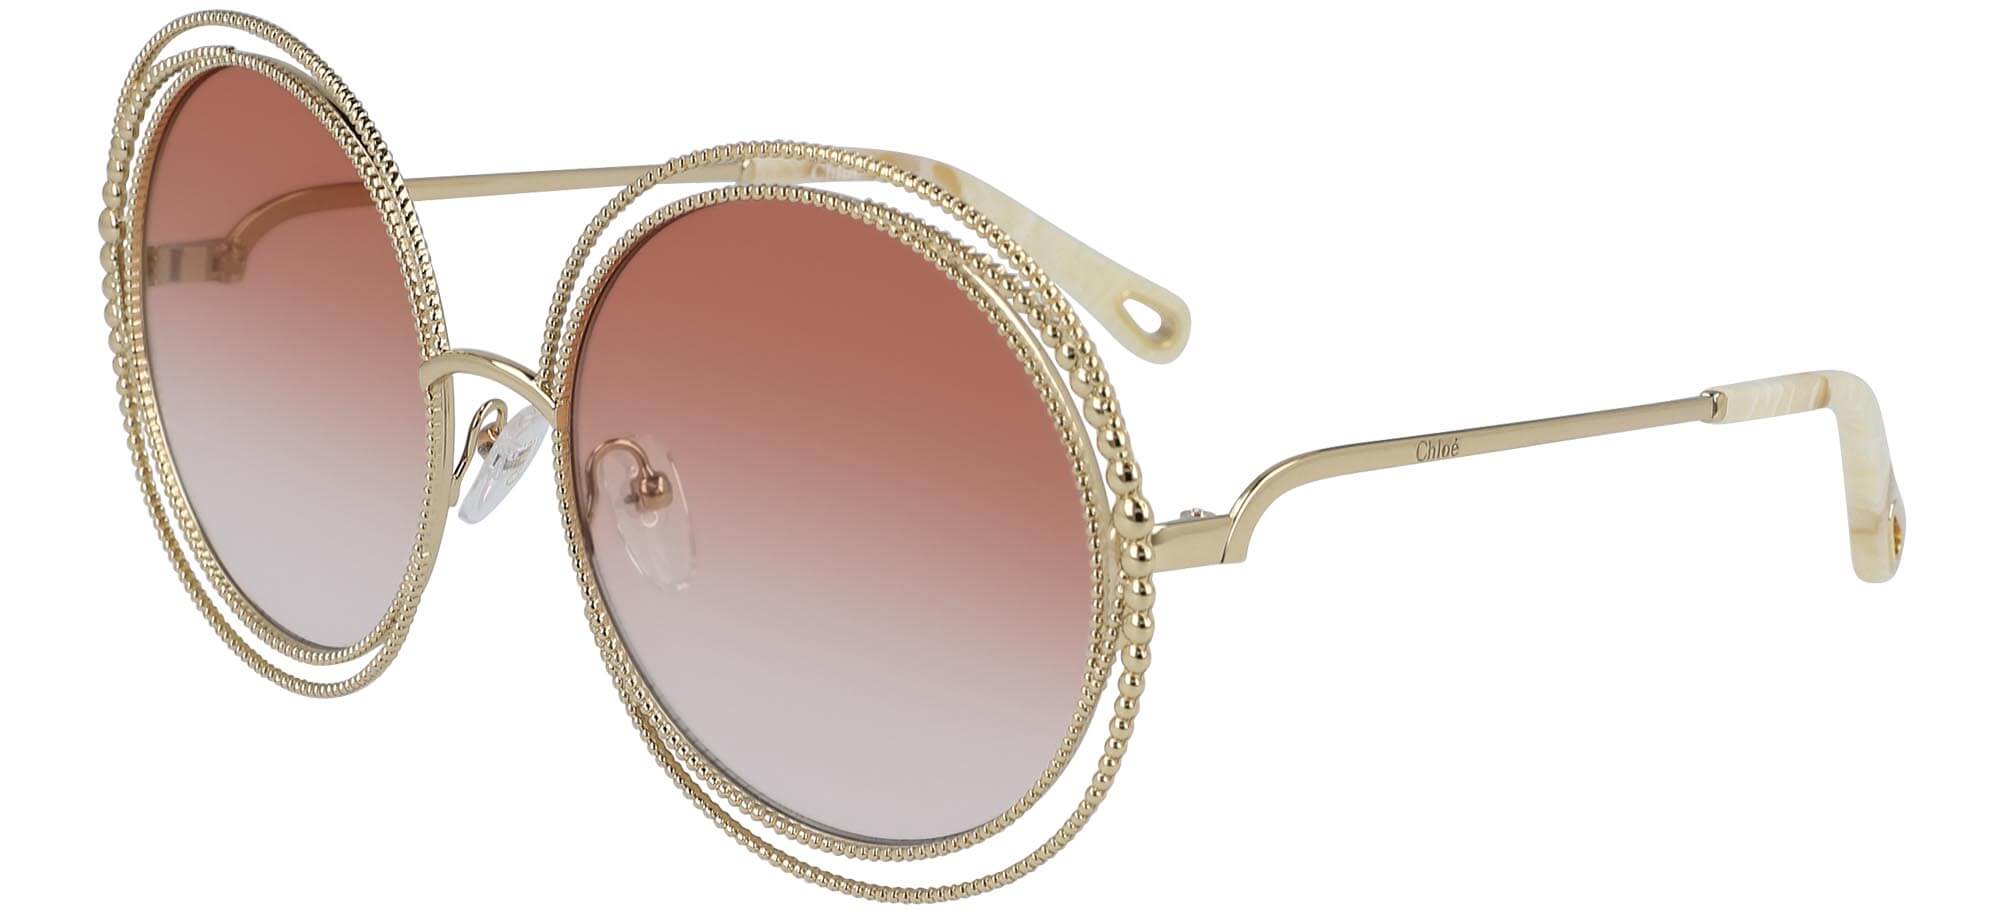 ChloéCARLINA CHAIN CE114SCGold/rose Shaded (724 F)